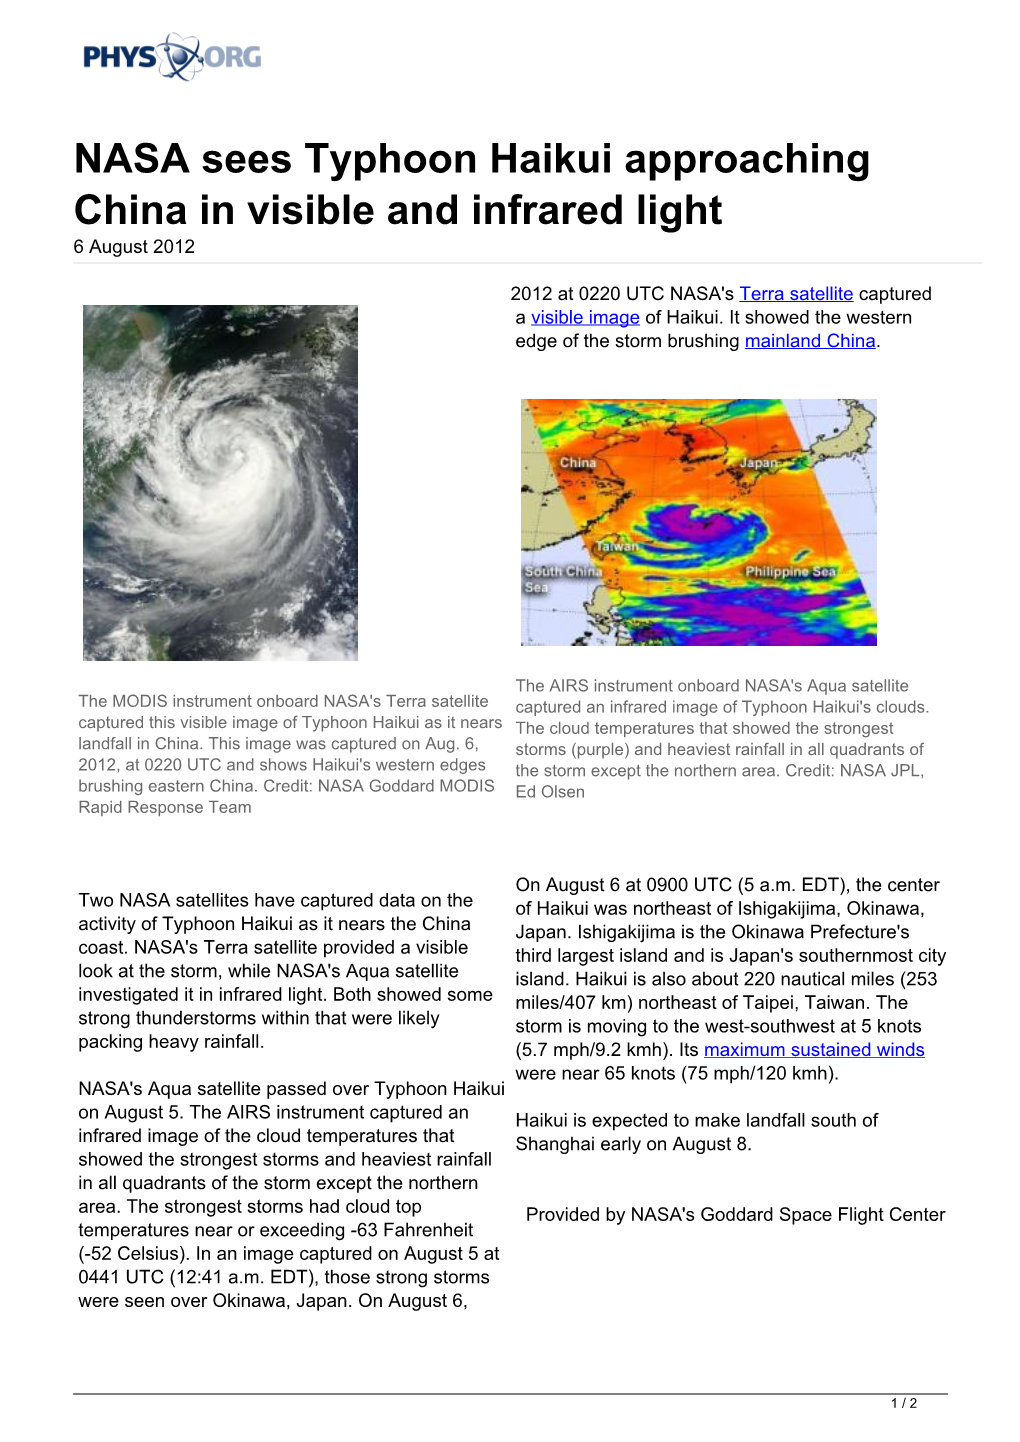 NASA Sees Typhoon Haikui Approaching China in Visible and Infrared Light 6 August 2012